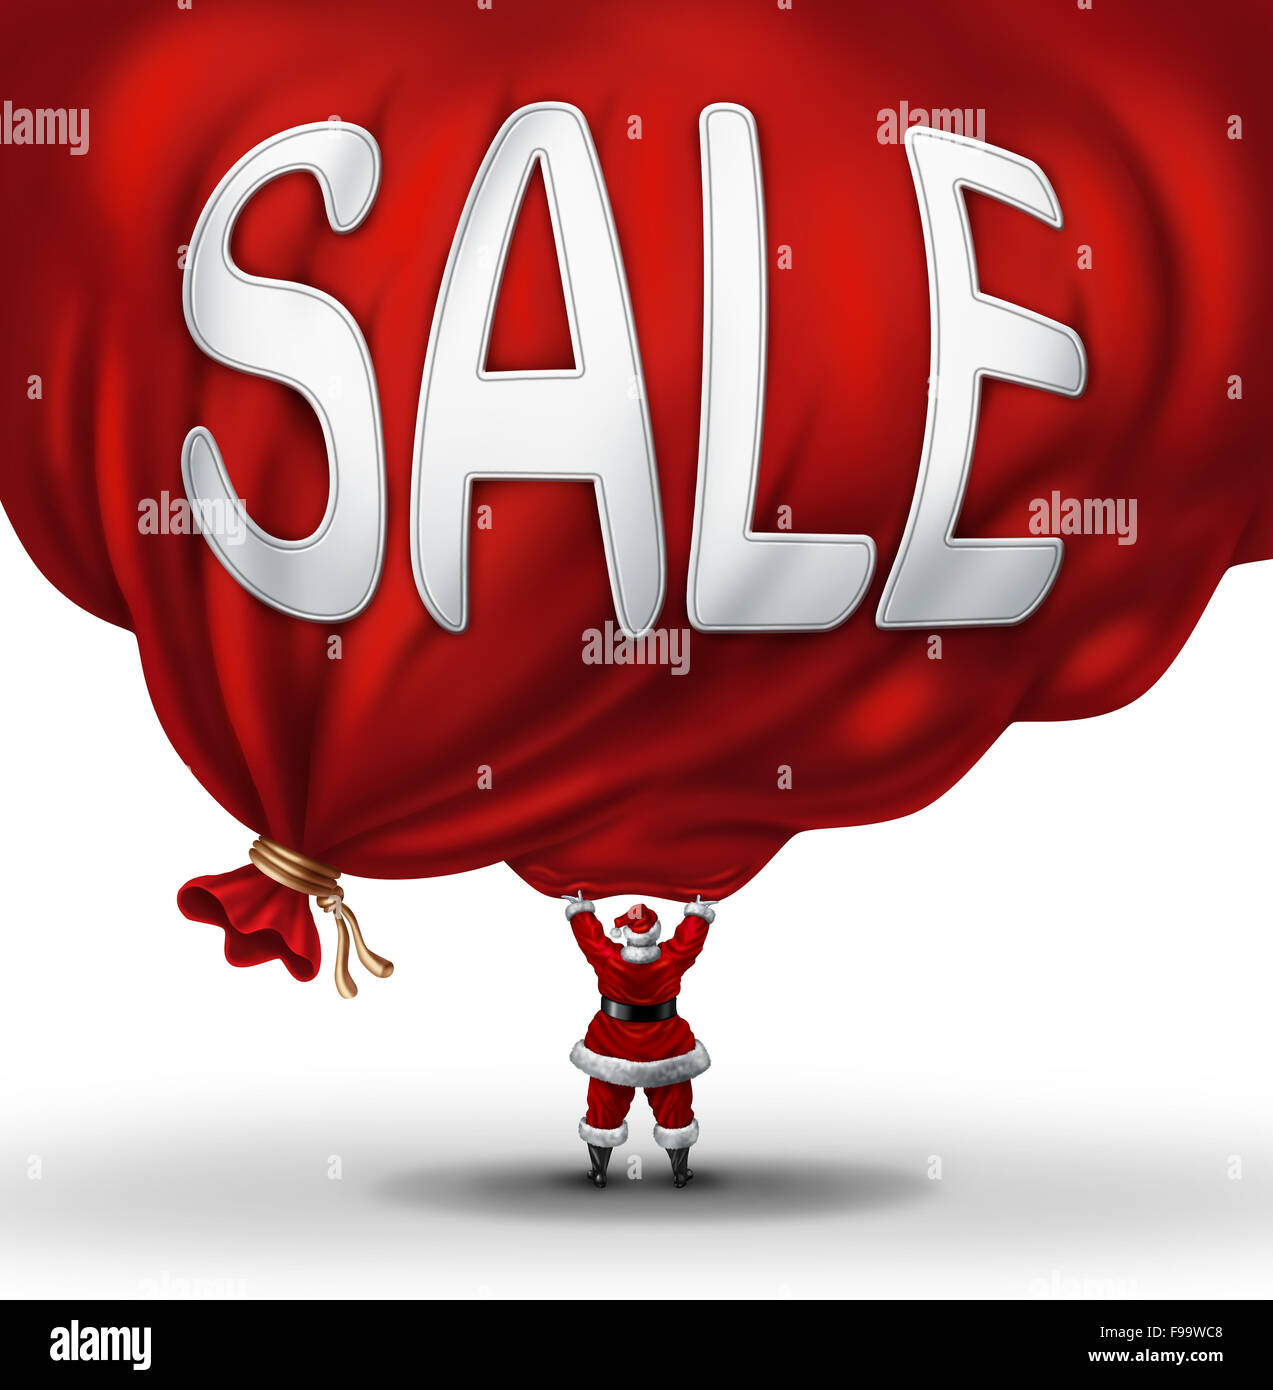 Big Christmas Sale symbol and holiday discounts icon as Santaclause lifting up a huge red gift bag with text on the promotional Stock Photo